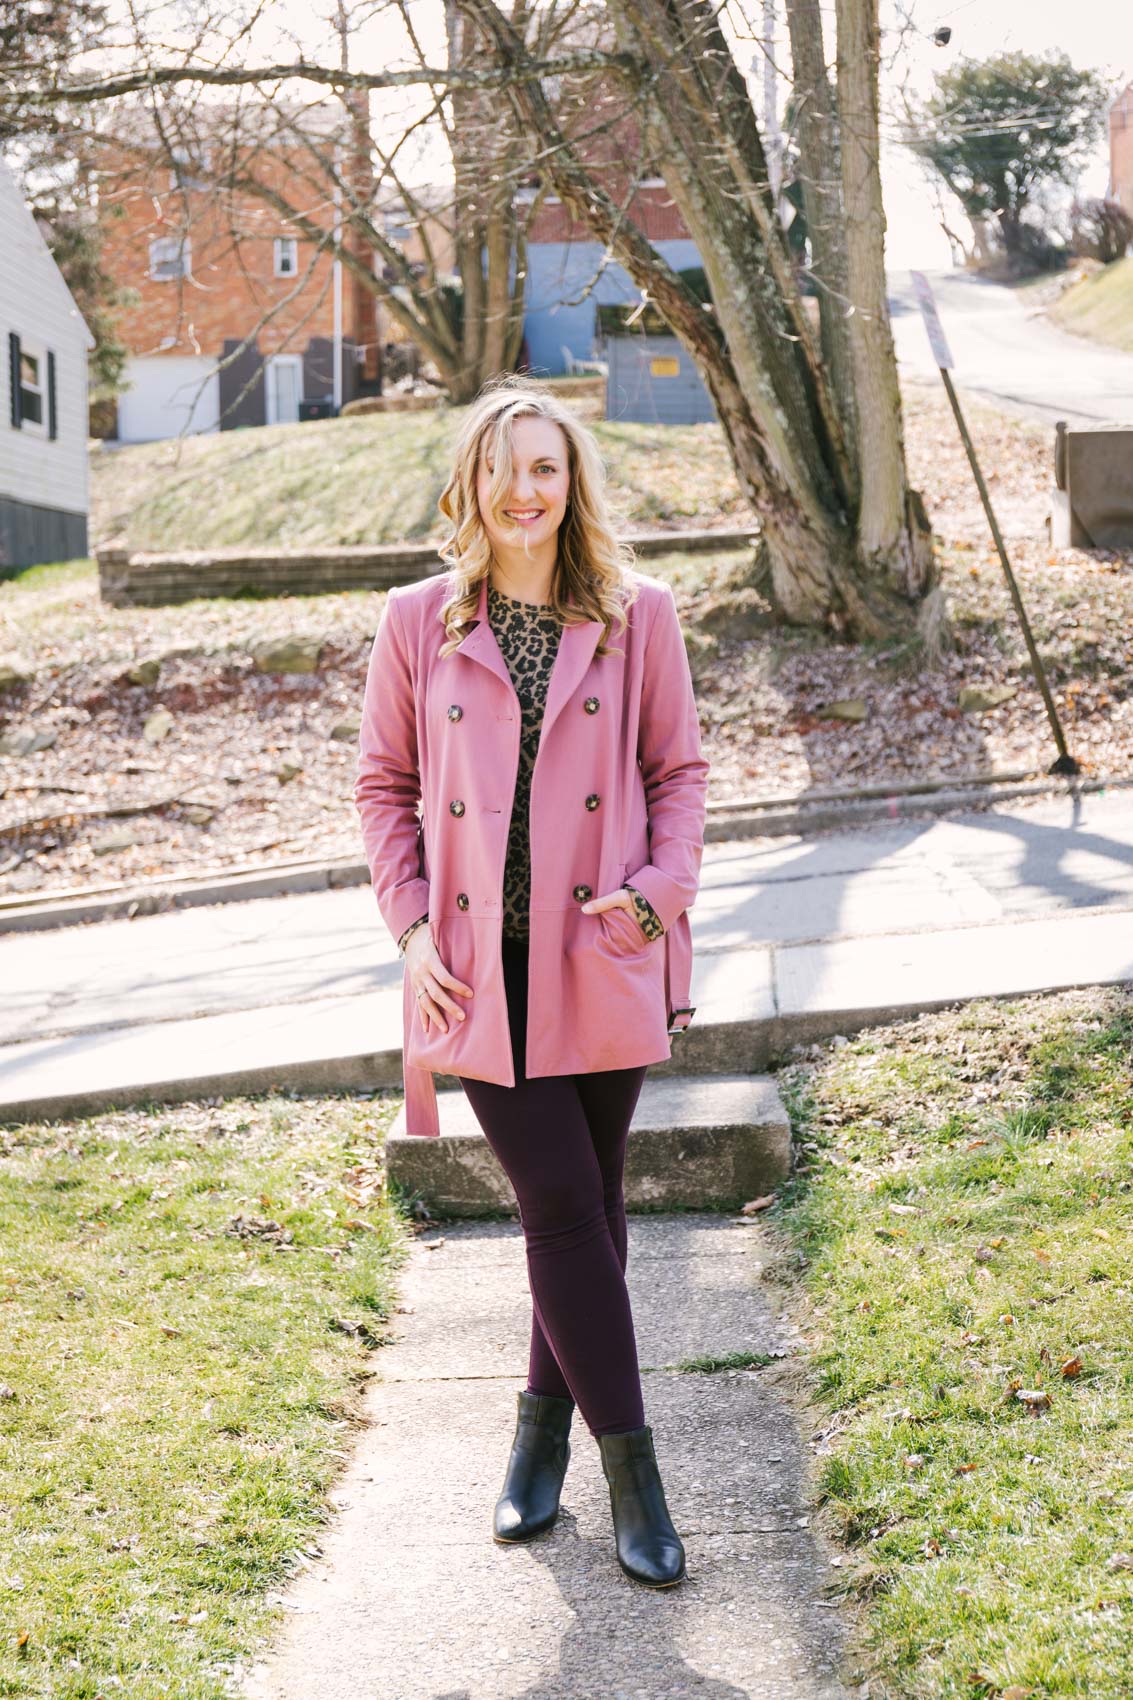 A casual pink trench coat outfit for spring